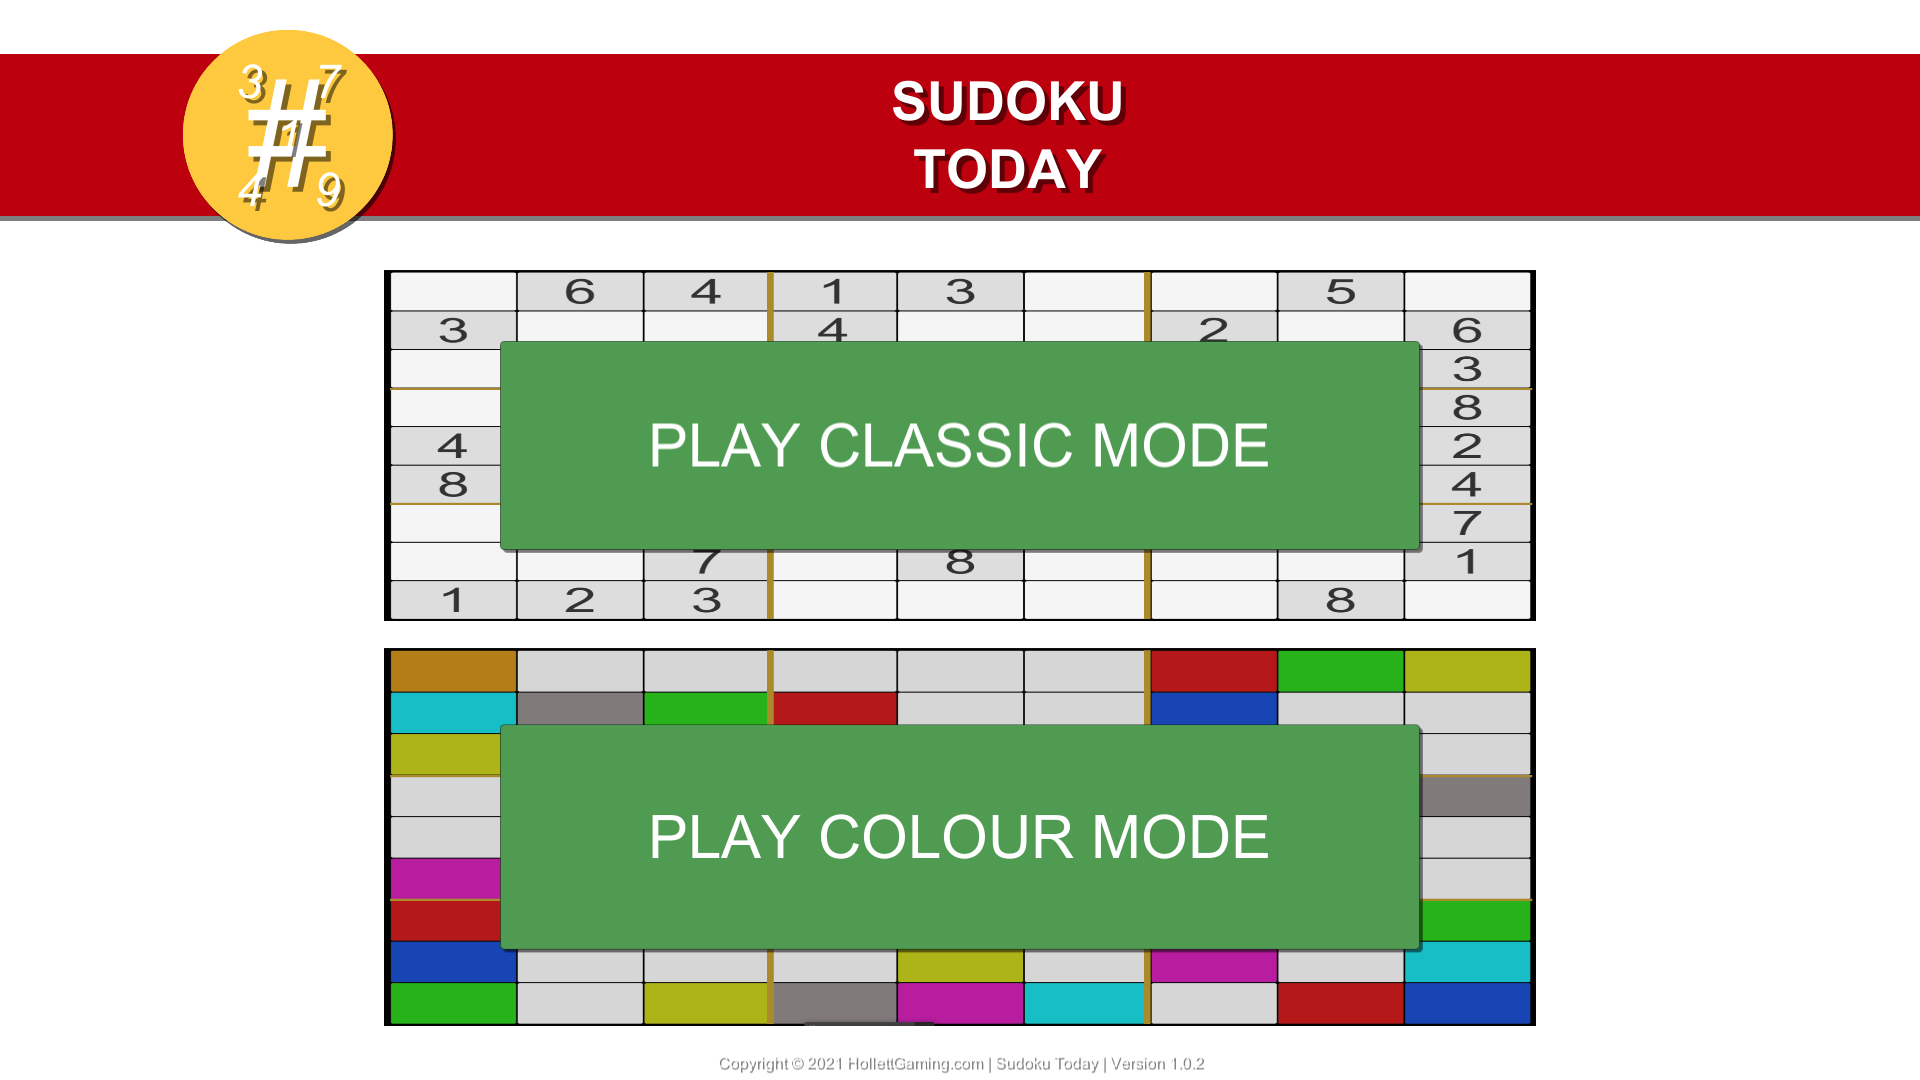 Projects: Sudoku Today